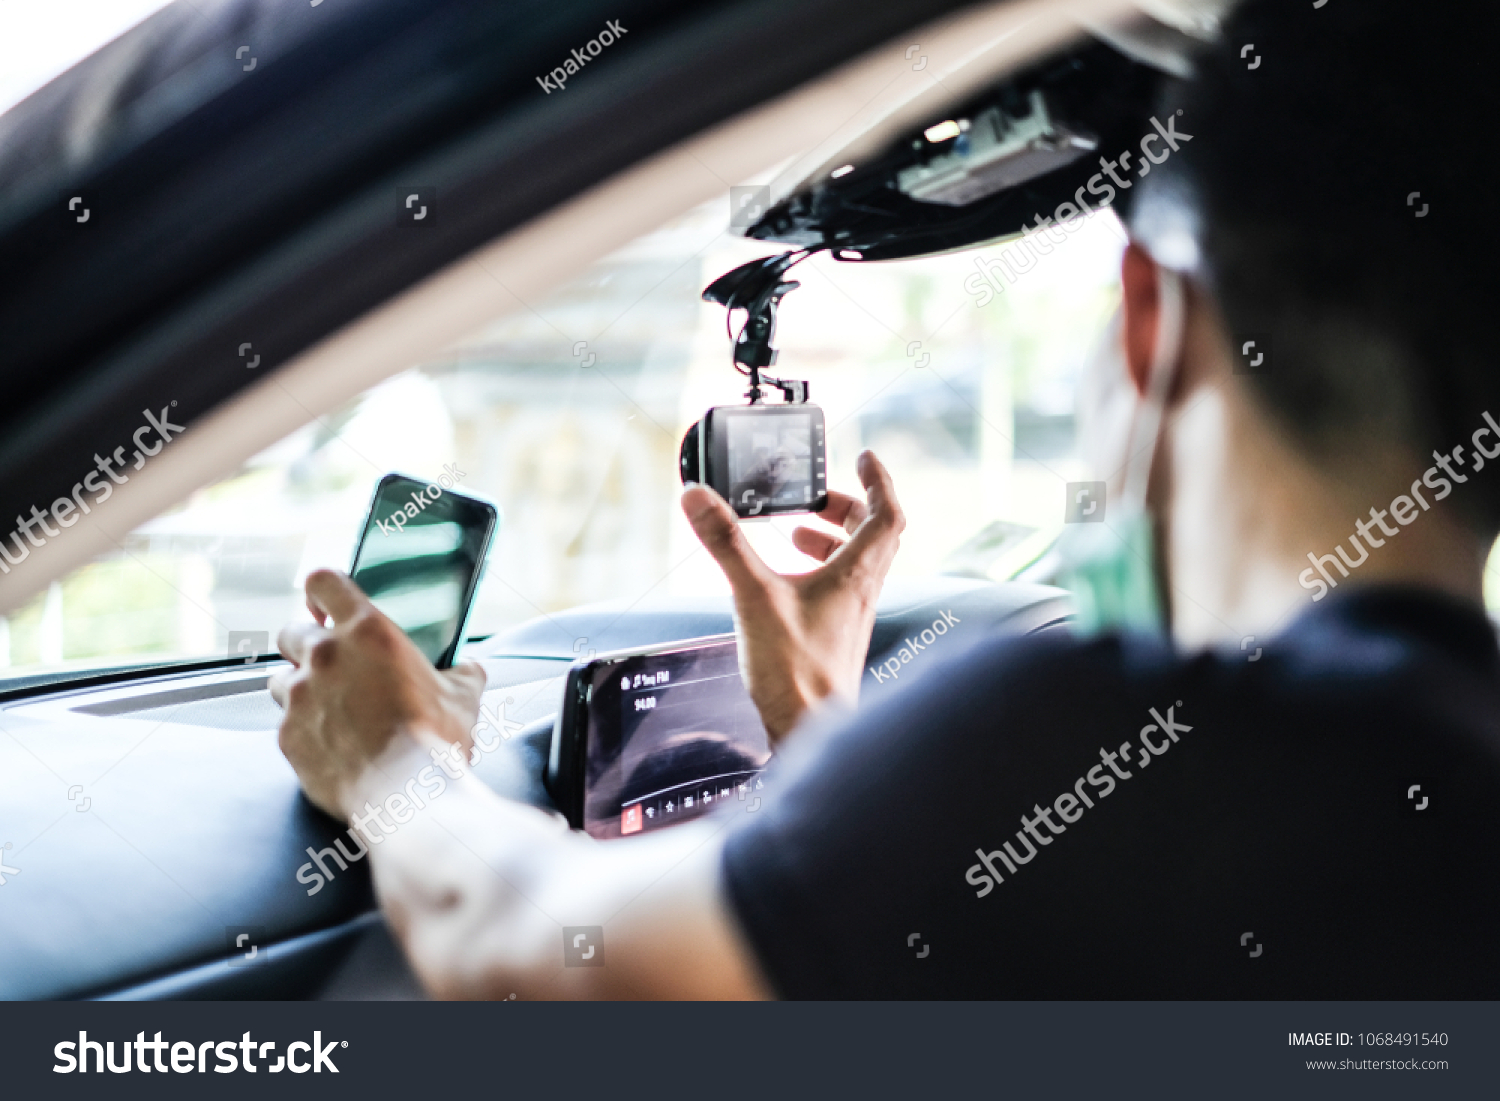 Close up Technician Hand with Car Camera and Smartphone Inside Car and Blur Man as a Foreground #1068491540